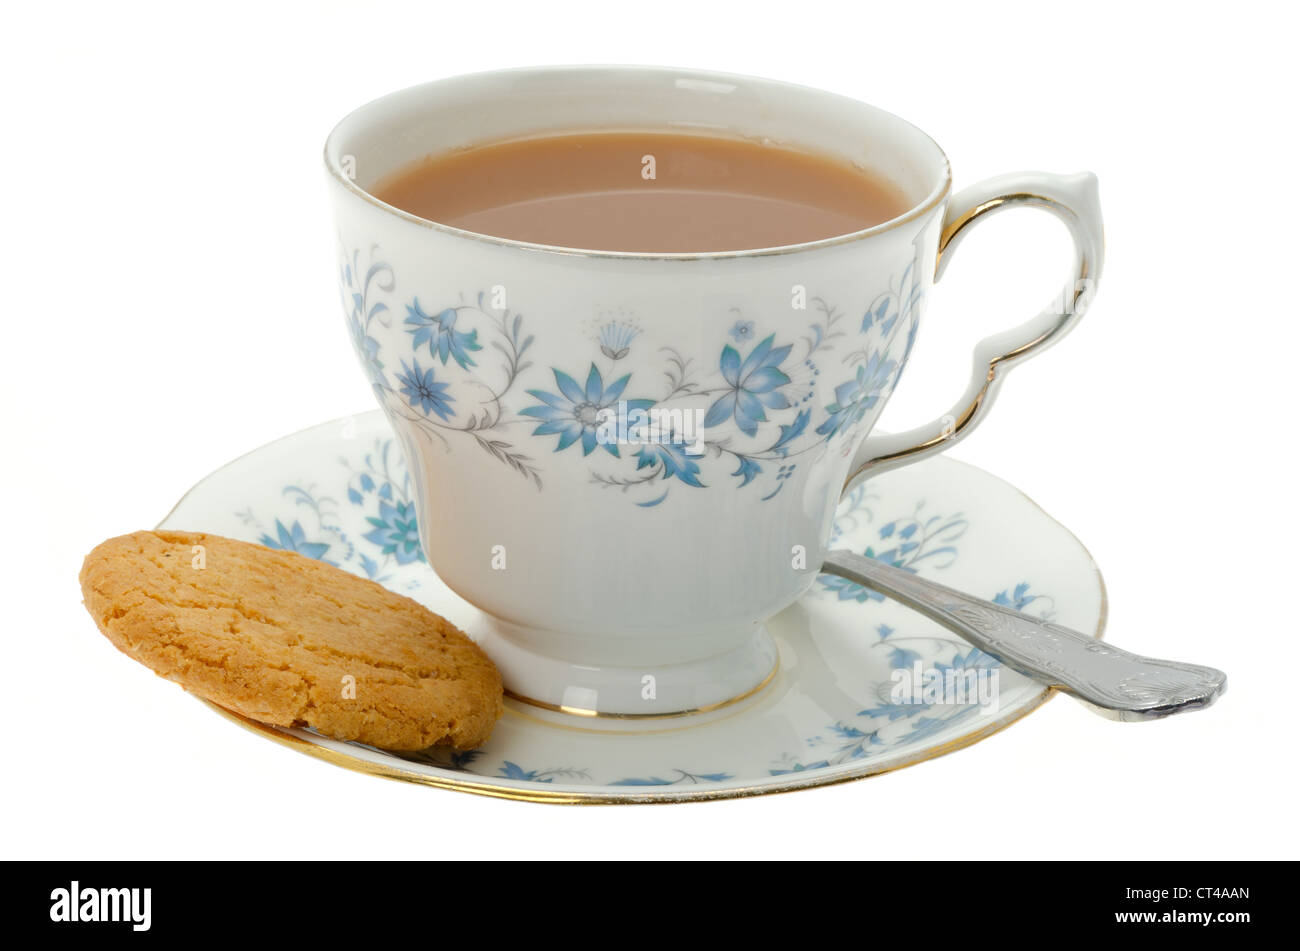 A cup of hot tea served in an ornate patterned cup and saucer with a biscuit - studio shot. Stock Photo